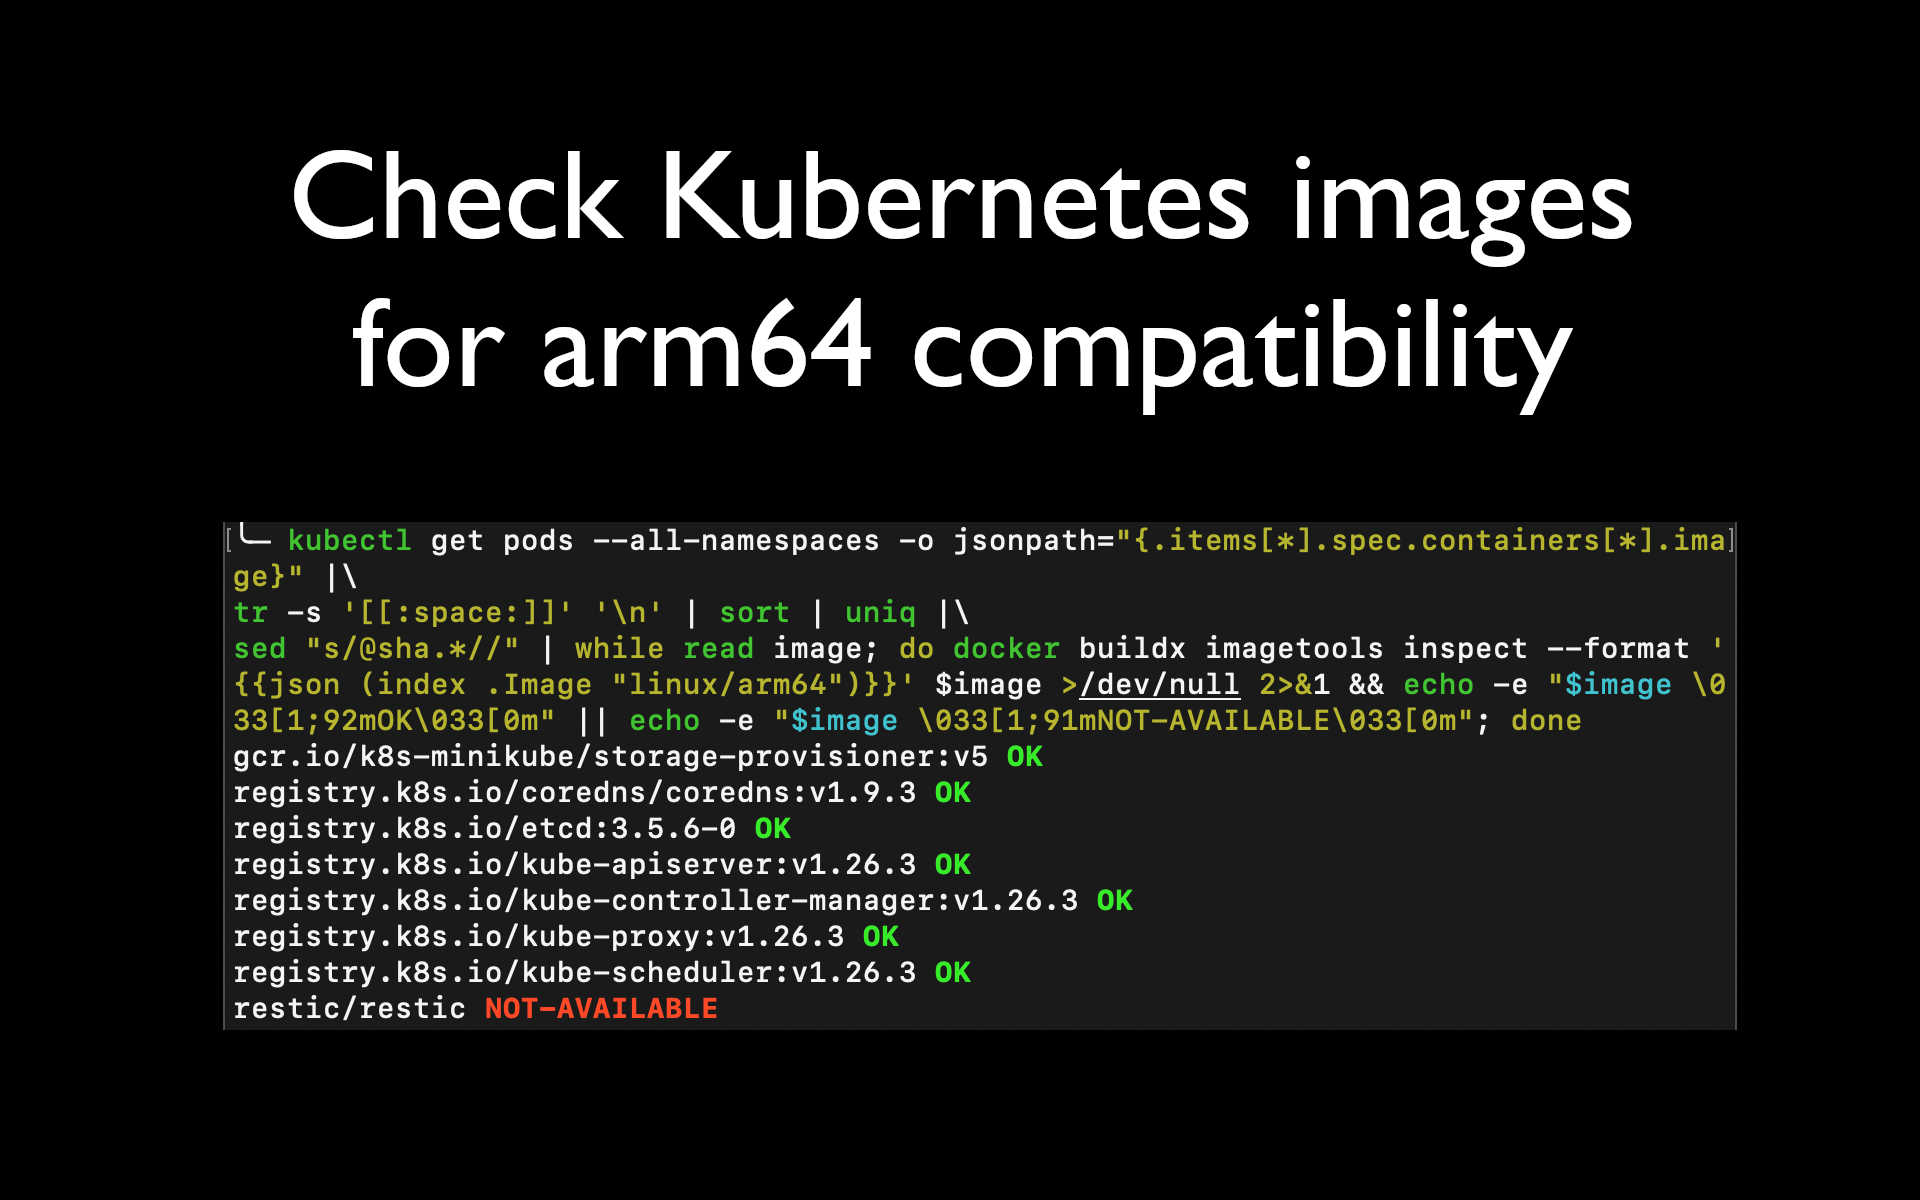 Check Kubernetes images for arm64 compatibility